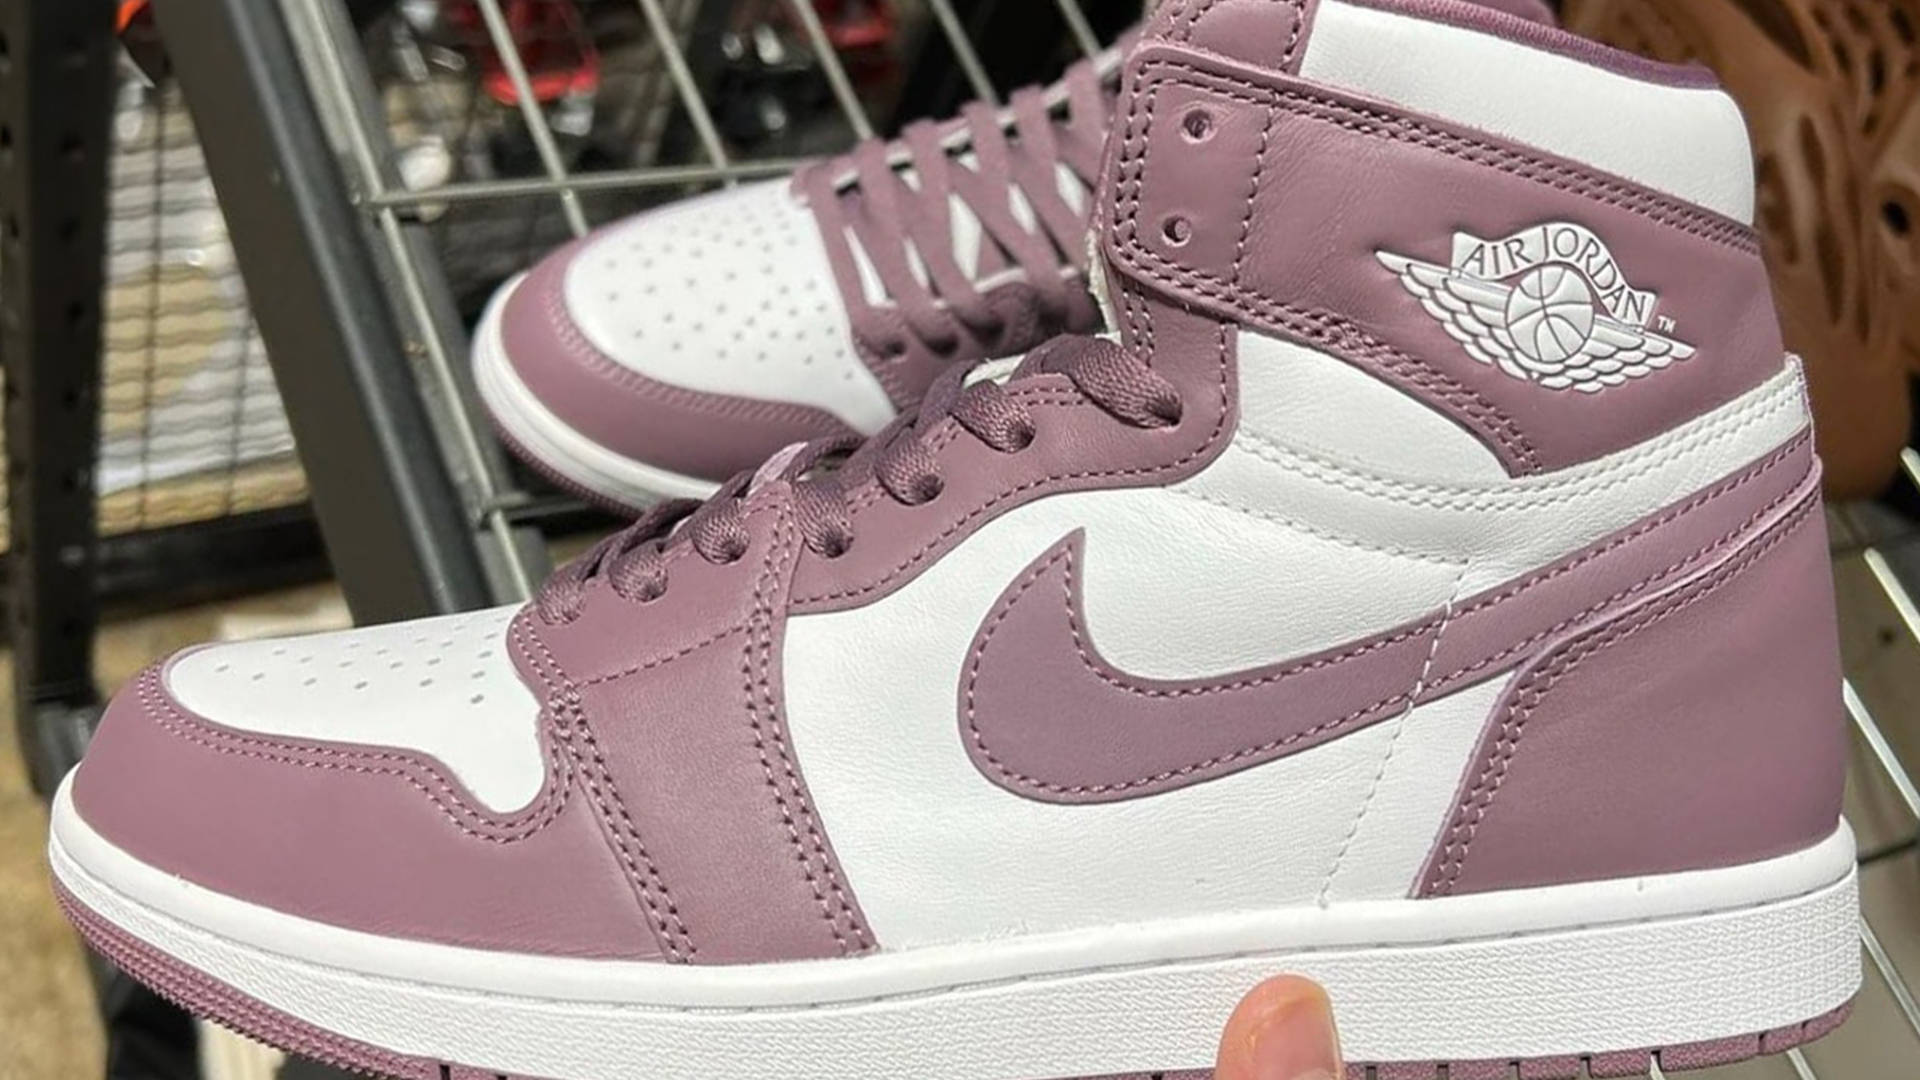 The Air Jordan 1 High "Sky Mauve" Is Expected Land In October | The Sole Supplier